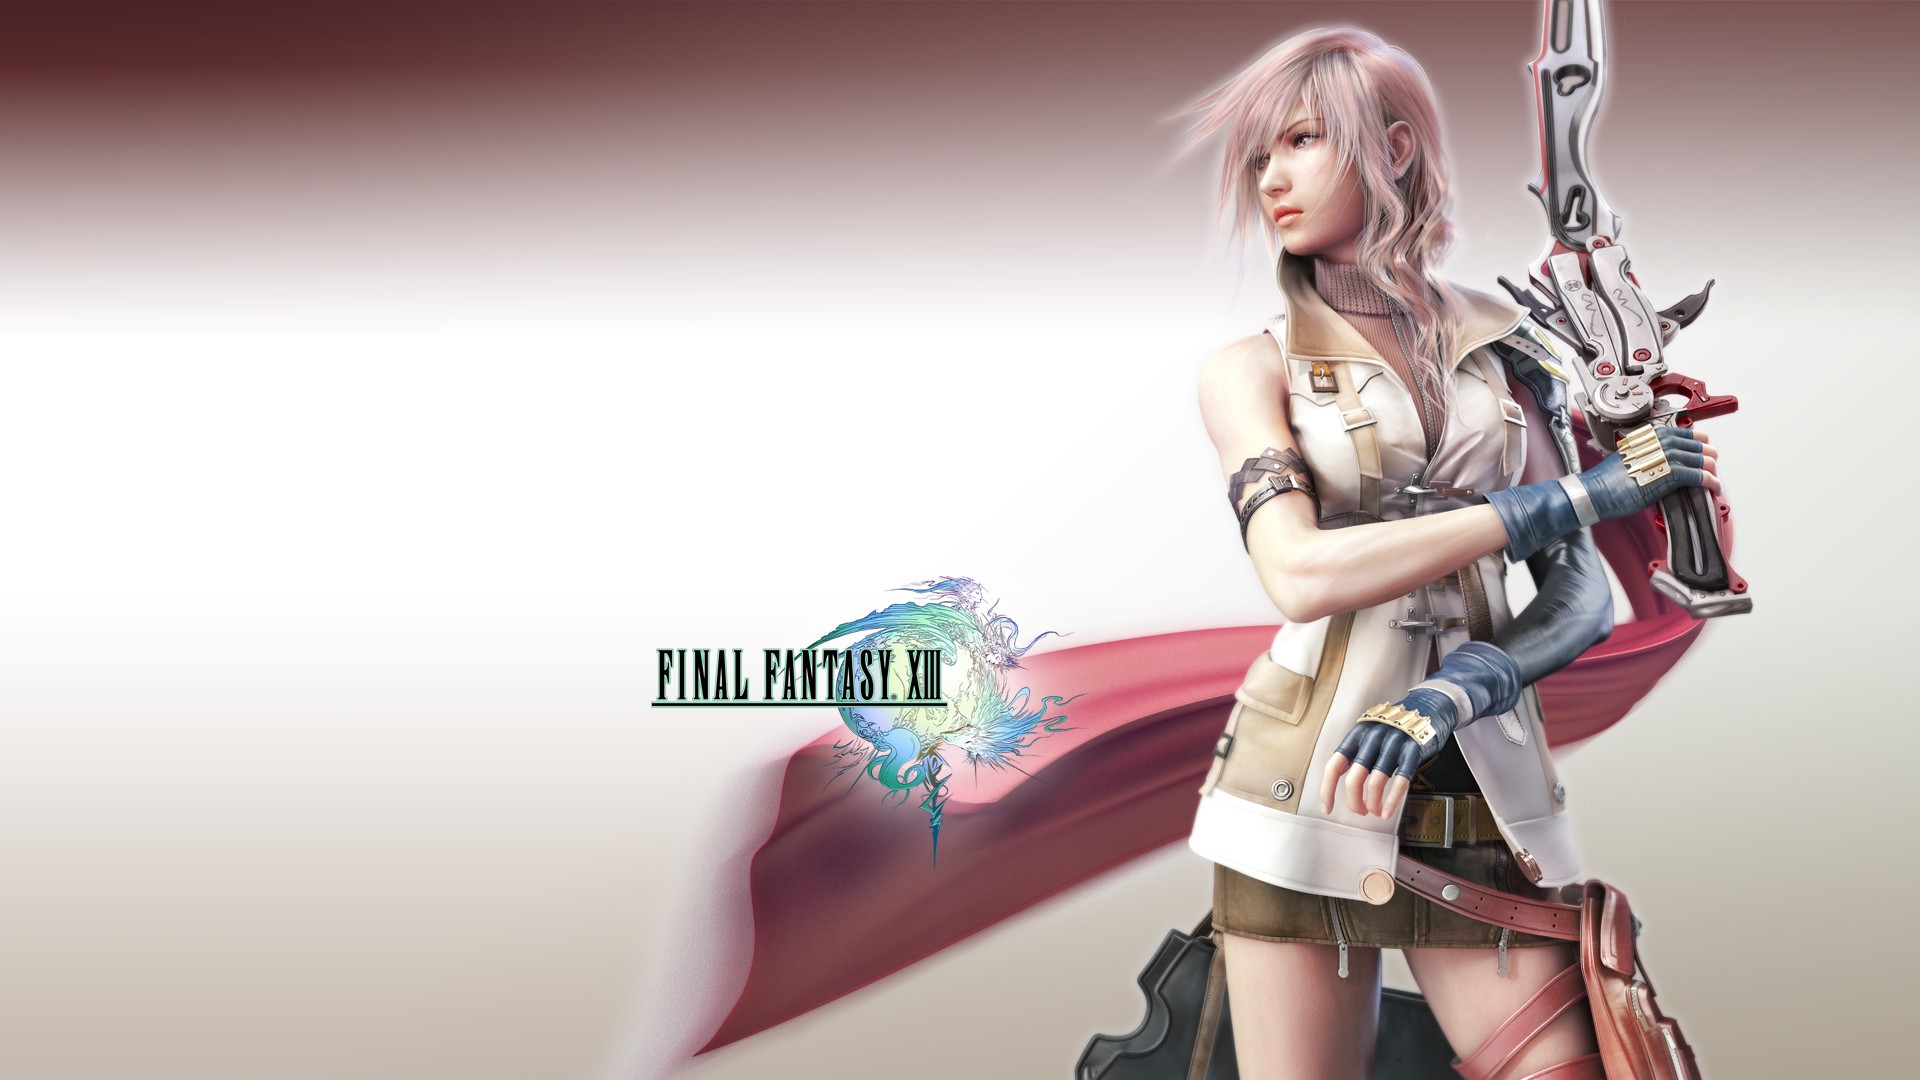 General 1920x1080 video games Final Fantasy XIII Claire Farron Final Fantasy simple background video game art Square Enix video game girls women with swords standing